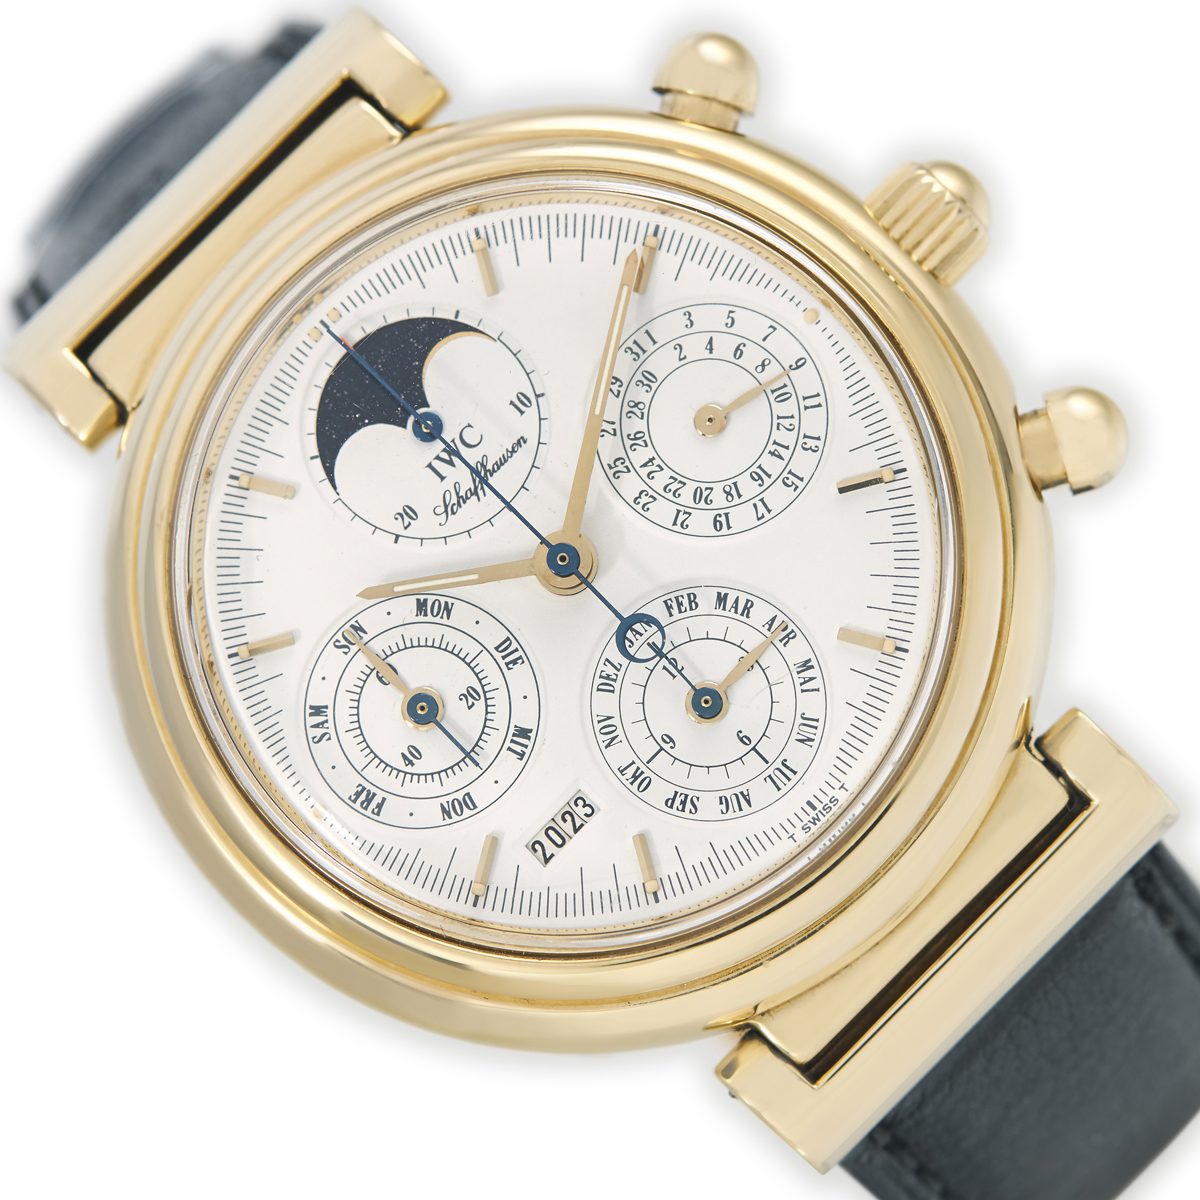 Meet The World's Most Expensive Watch: $31 Million Patek Philippe Sets  World Record At Only Watch Auction